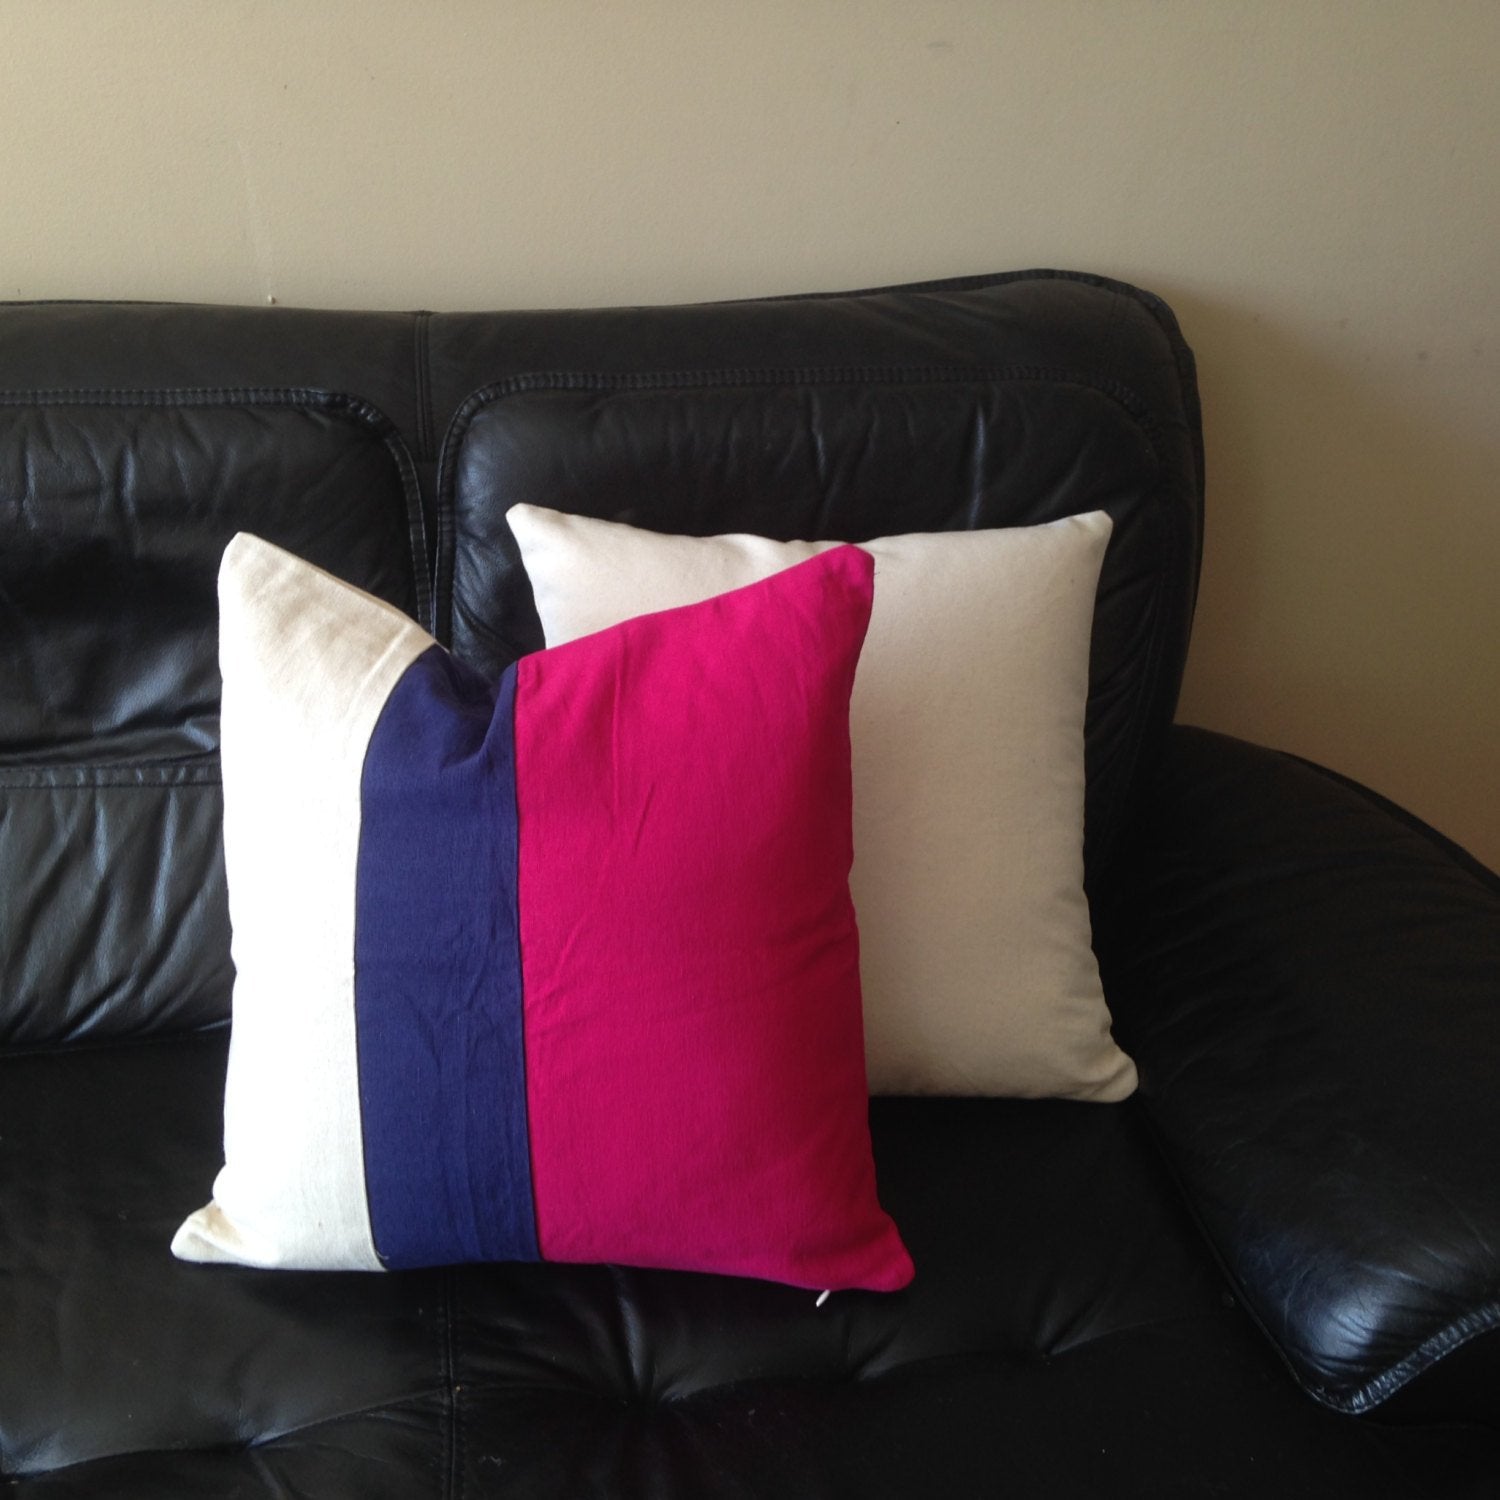 Three Tone Pink, Navy Blue and Cream Colorblock Throw Pillows